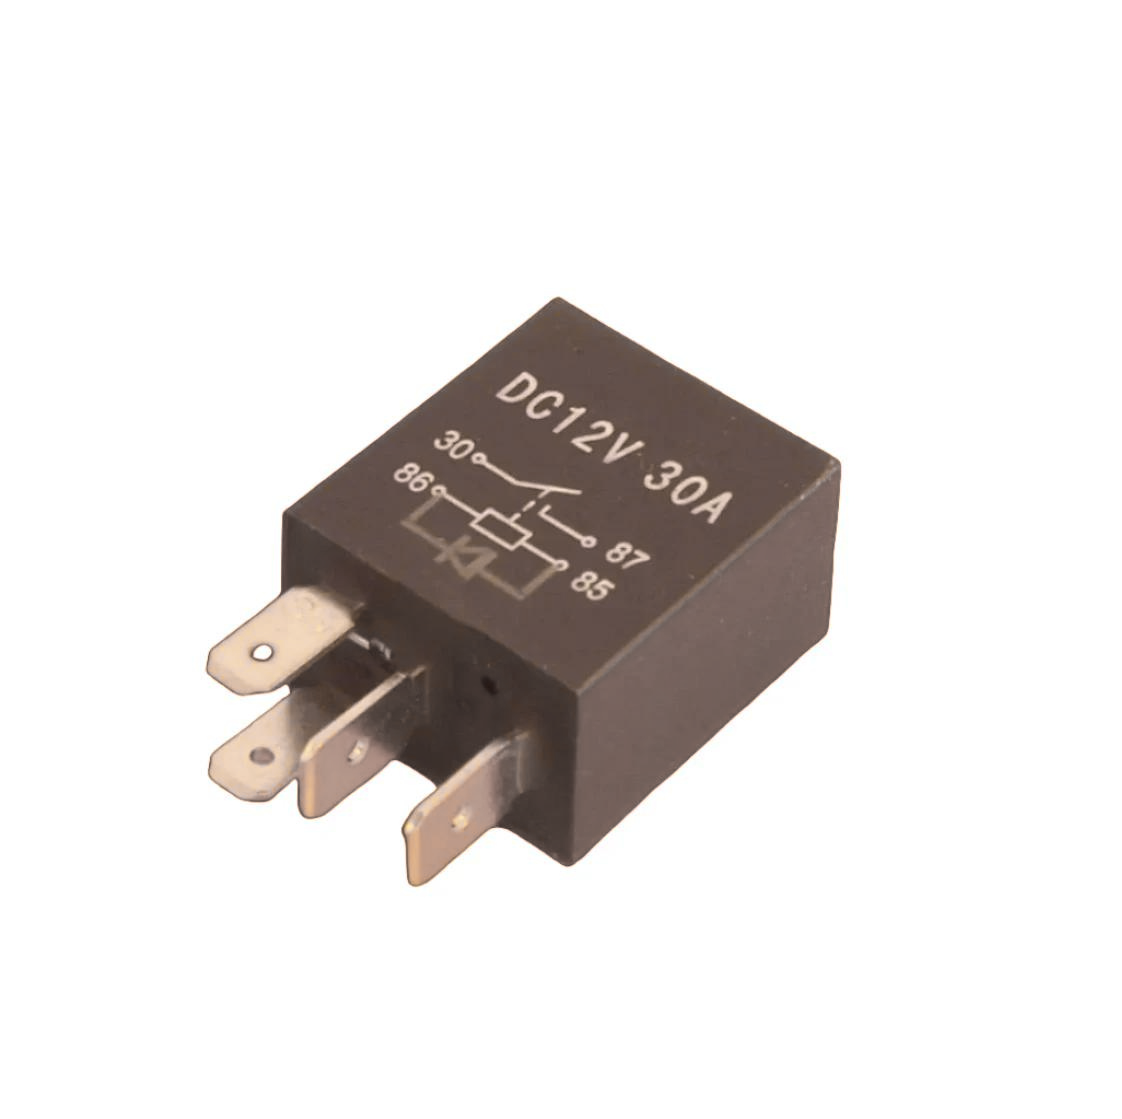 High Quality Micro Relay 12V 30 Amp 4 Pin Normally Open with Diode - Car Van